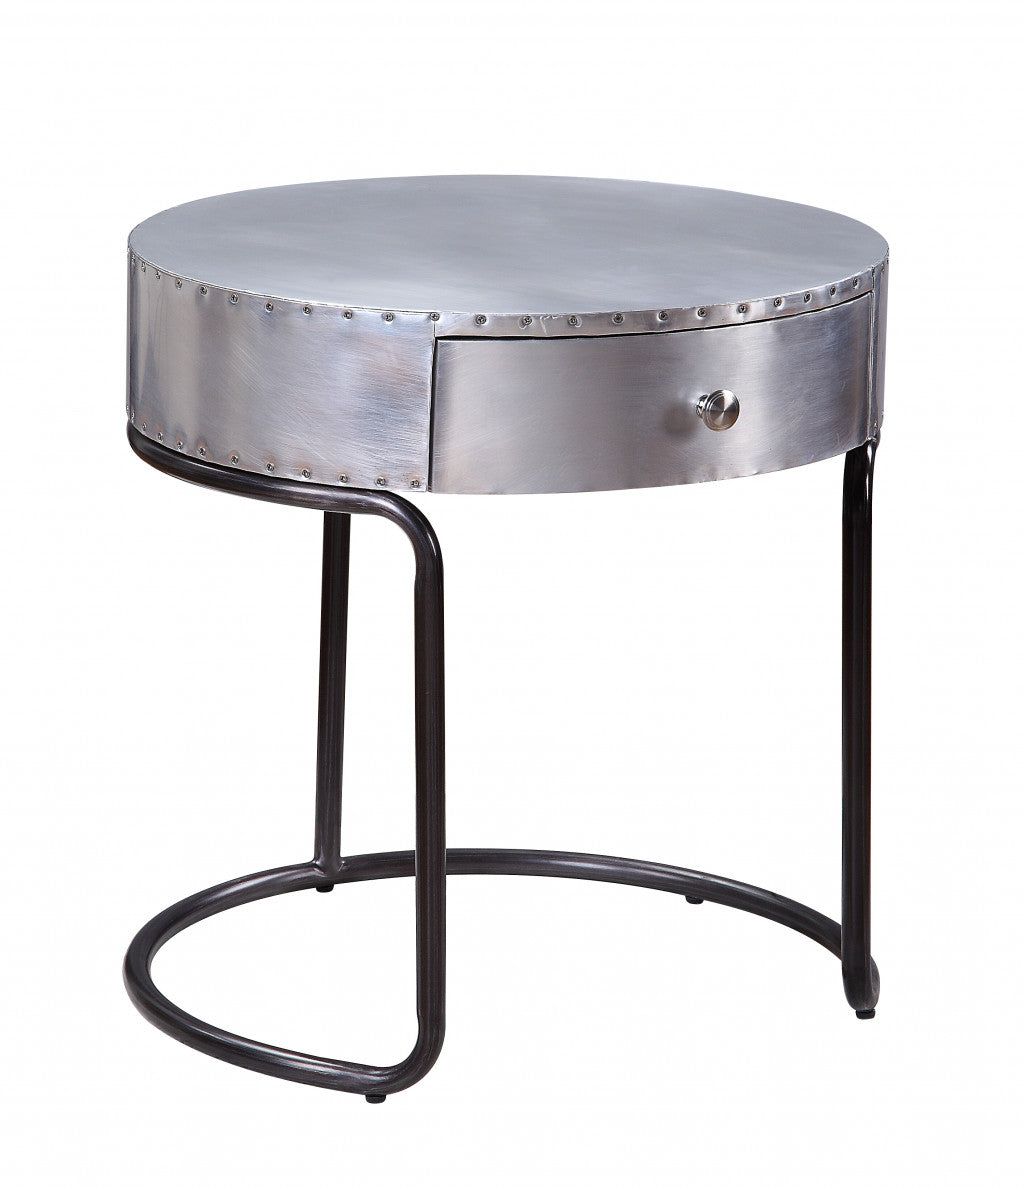 21" Aluminum And Manufactured Wood Round End Table With Drawer